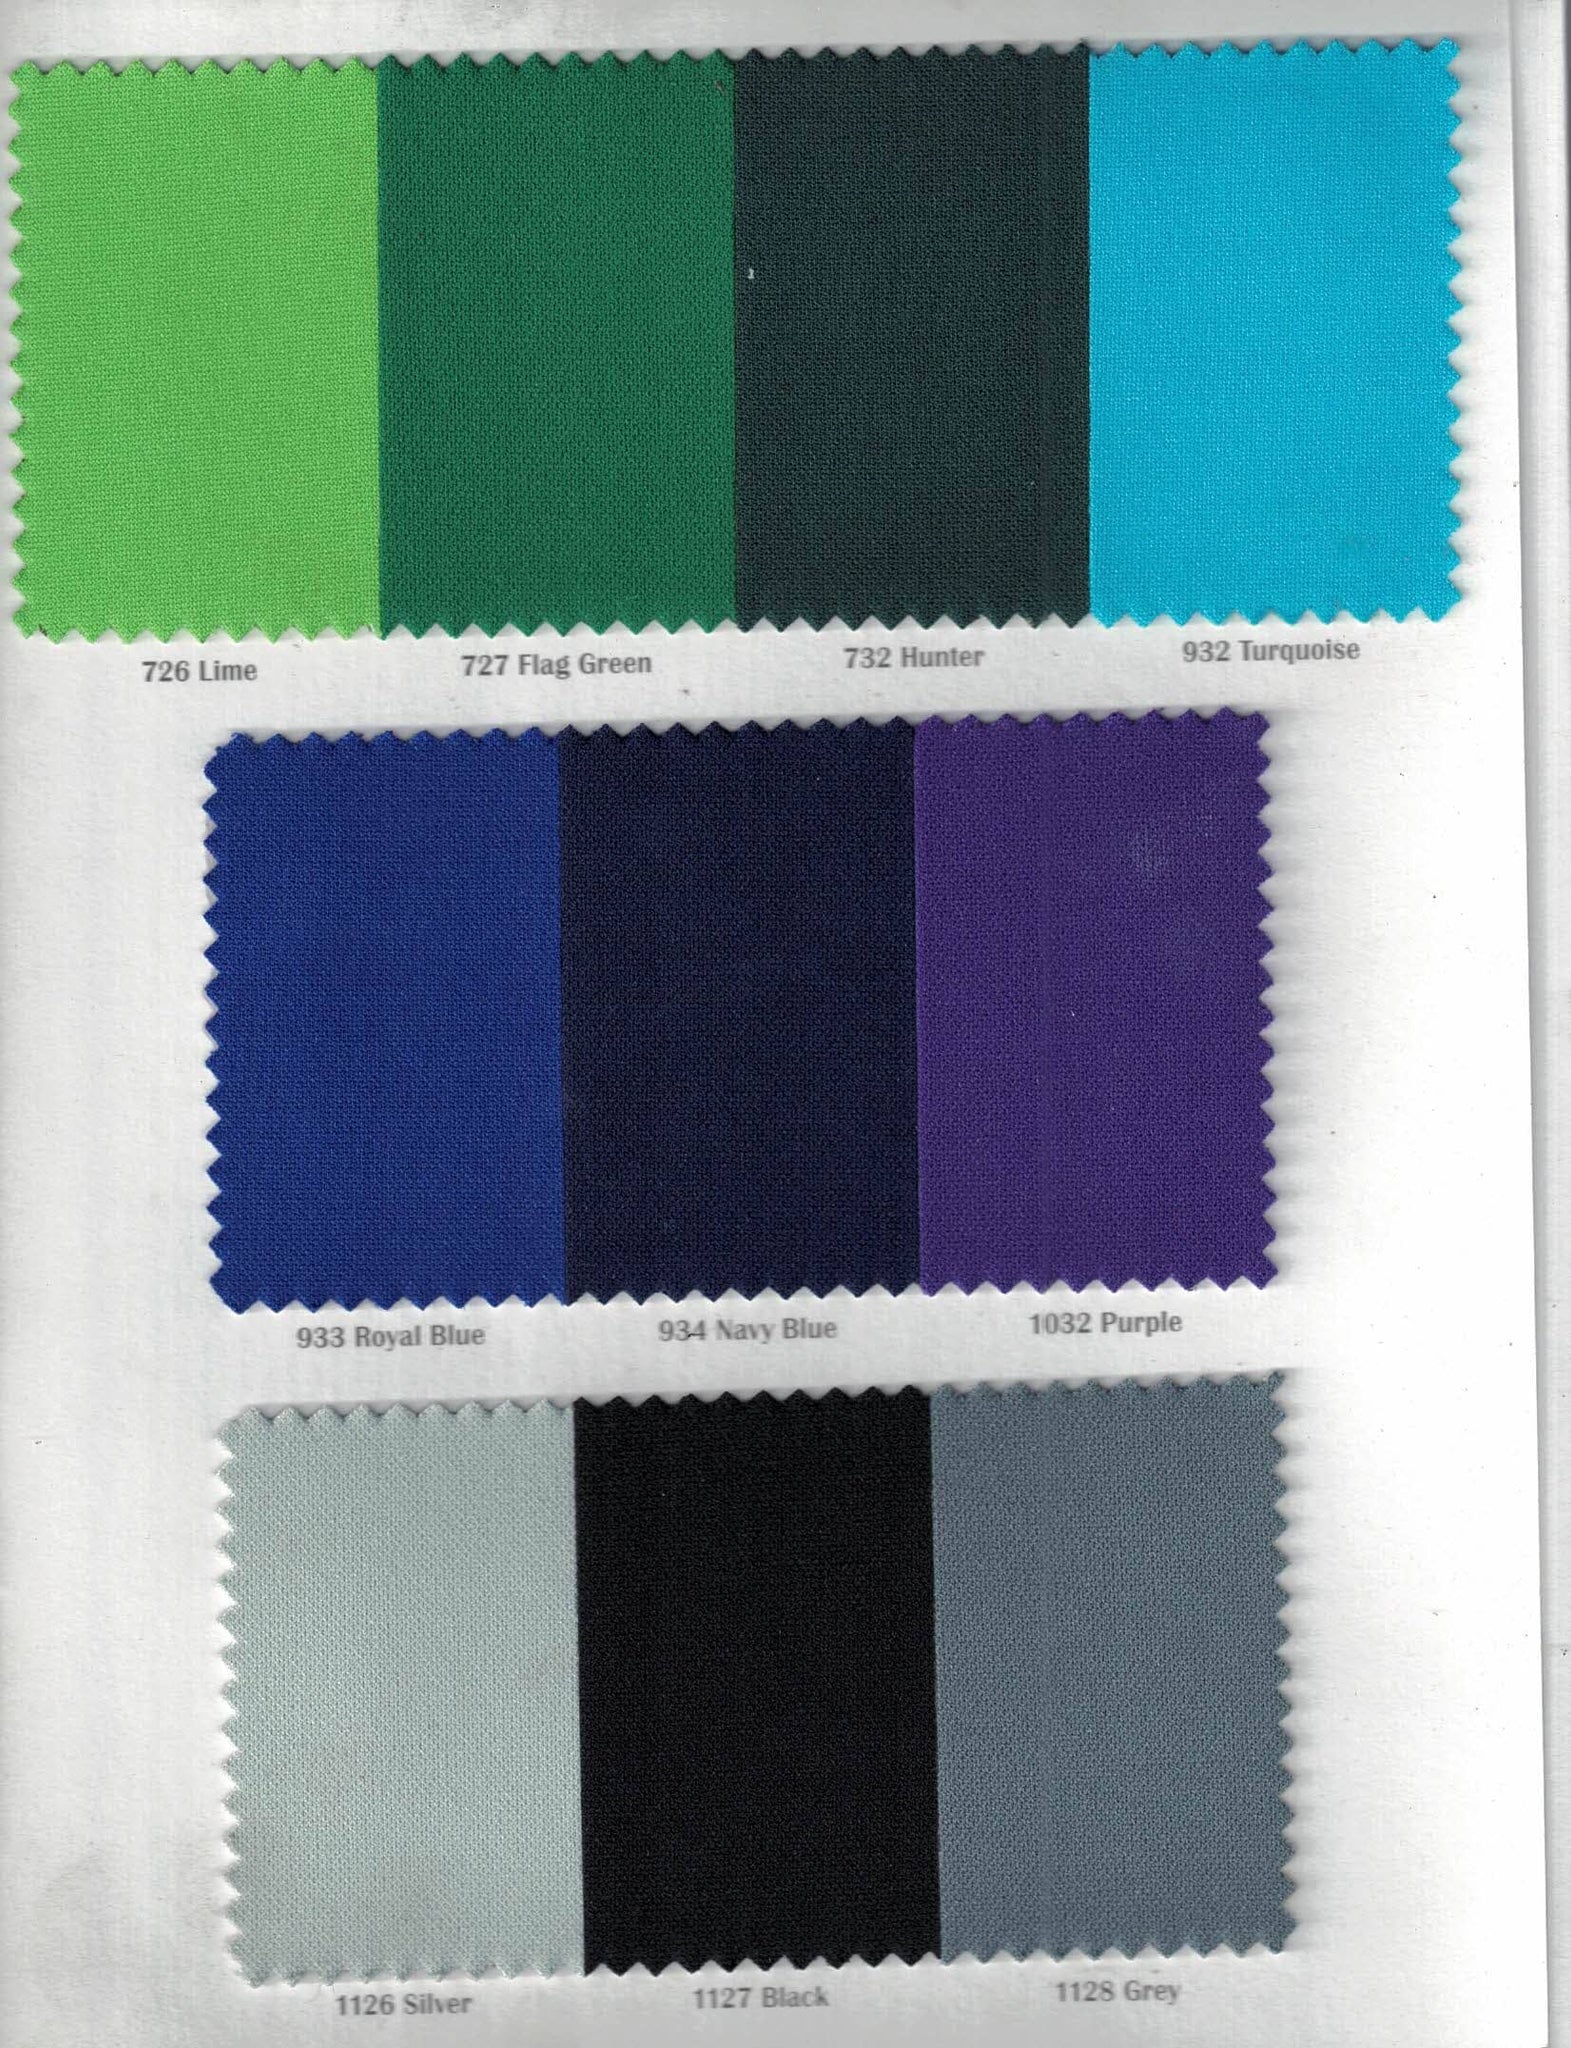 Scuba Double Knit Fabric Bolts, Sample Swatches and by the Yard